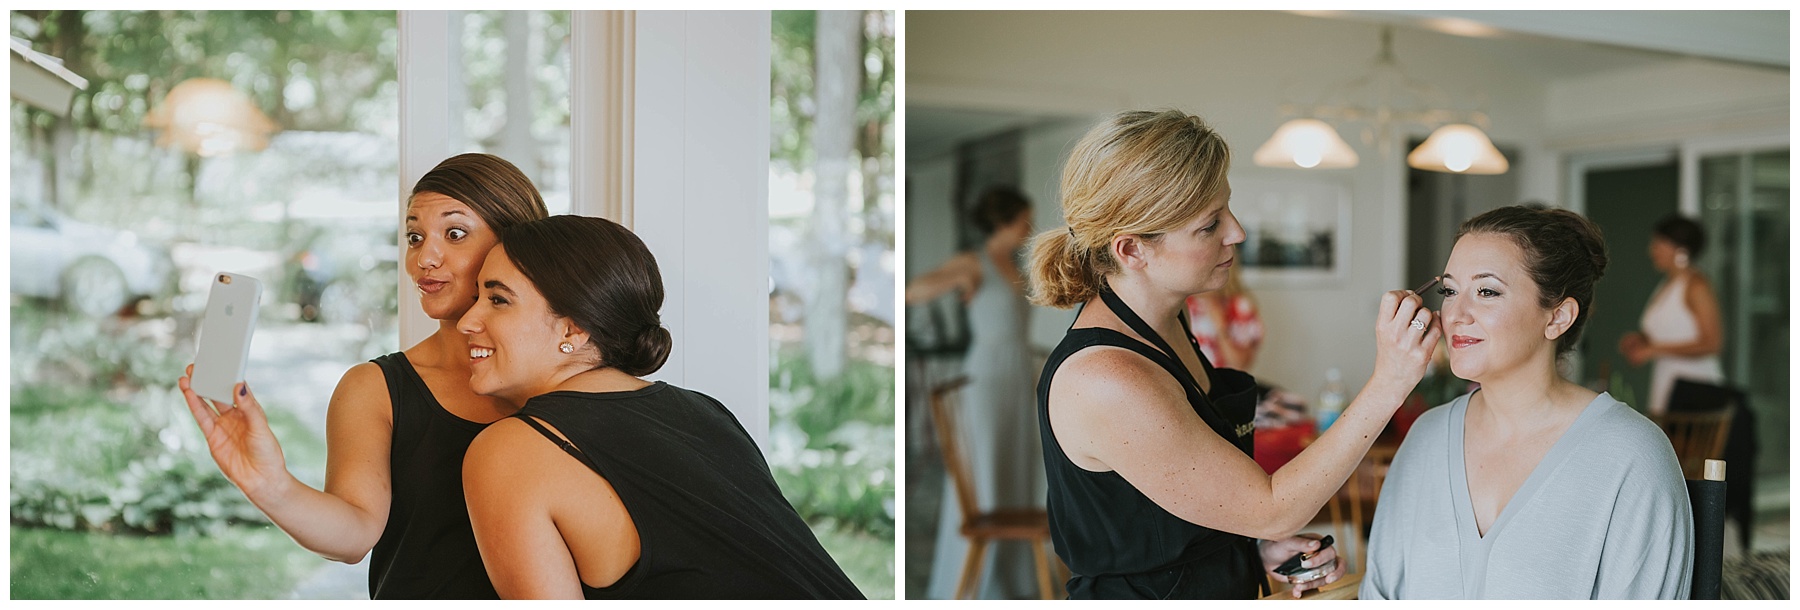 Getting ready photos and makeup by Makeup Artists Guild | Photography by Amy Donohue Photography